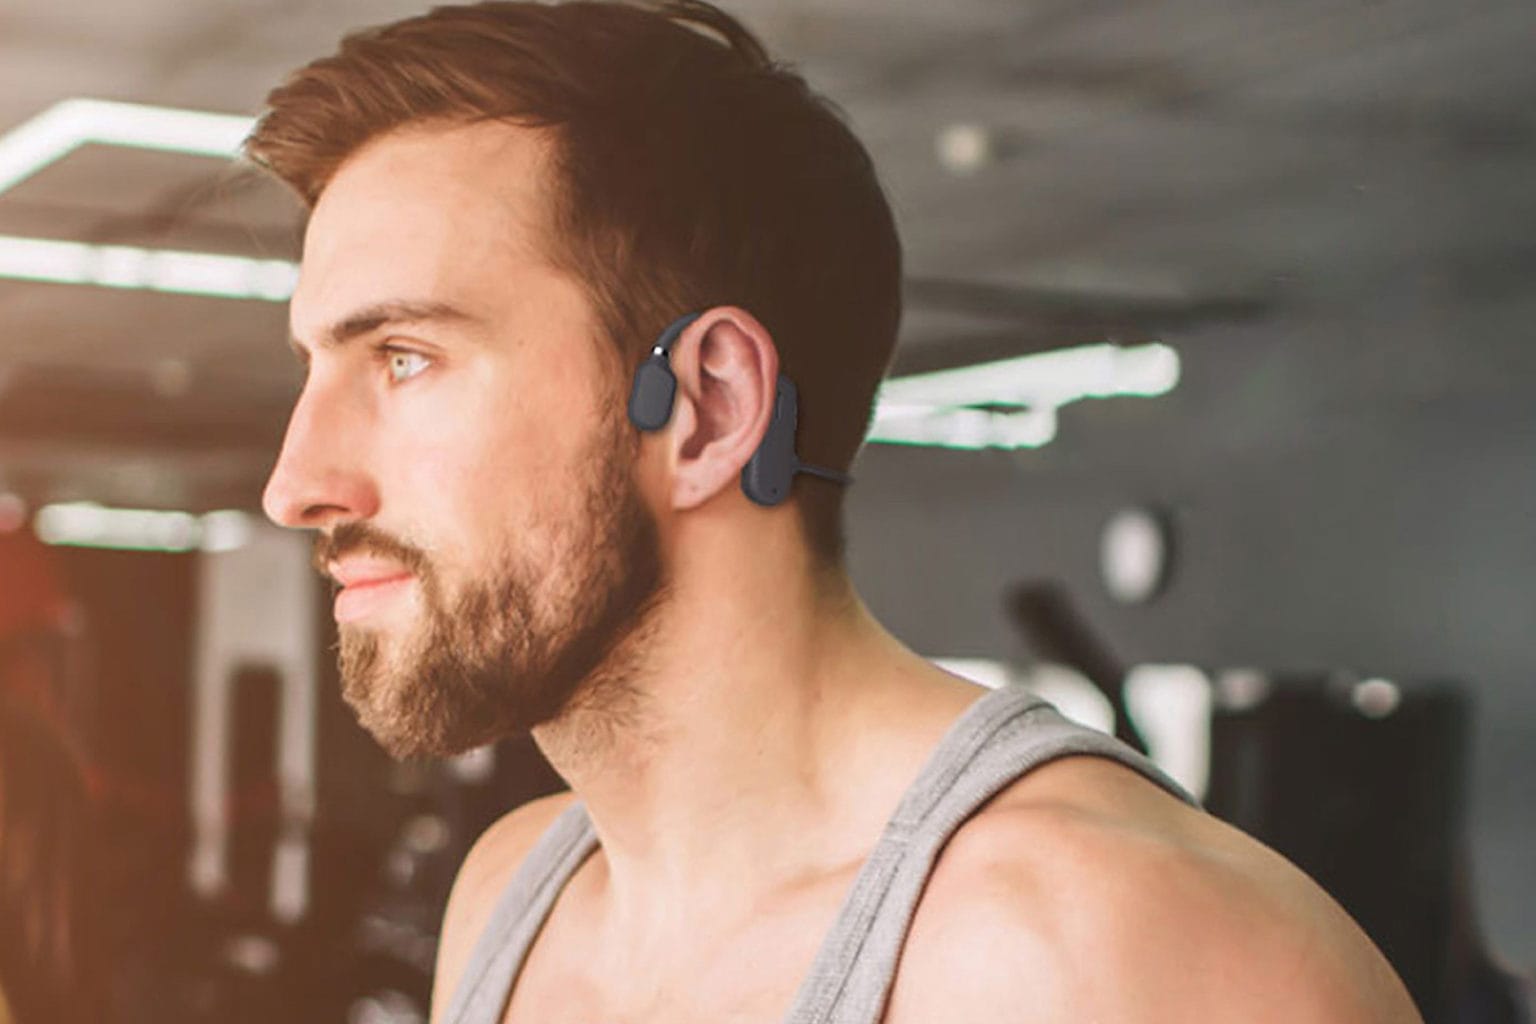 Hear what you need and what you want with these headphones boasting bone conduction technology.